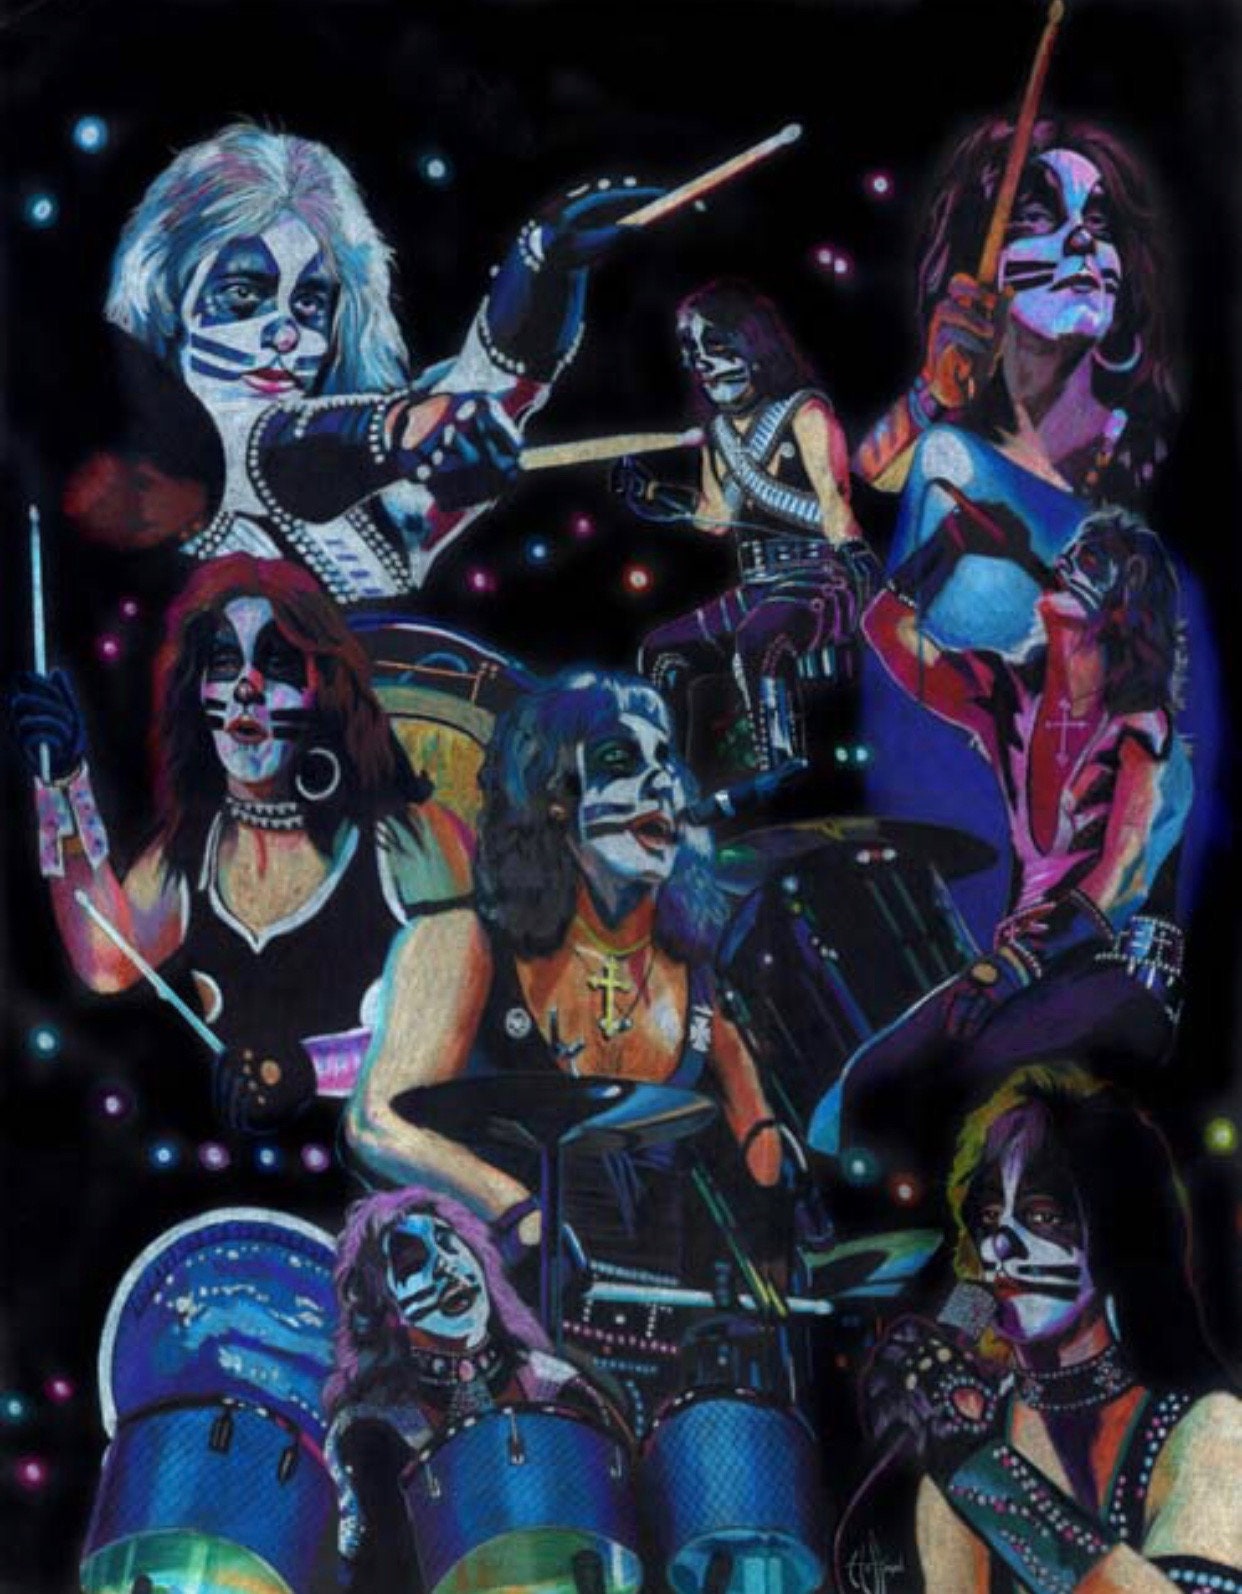 Founding Members of KISS from Rock & Roll Hall of Fame